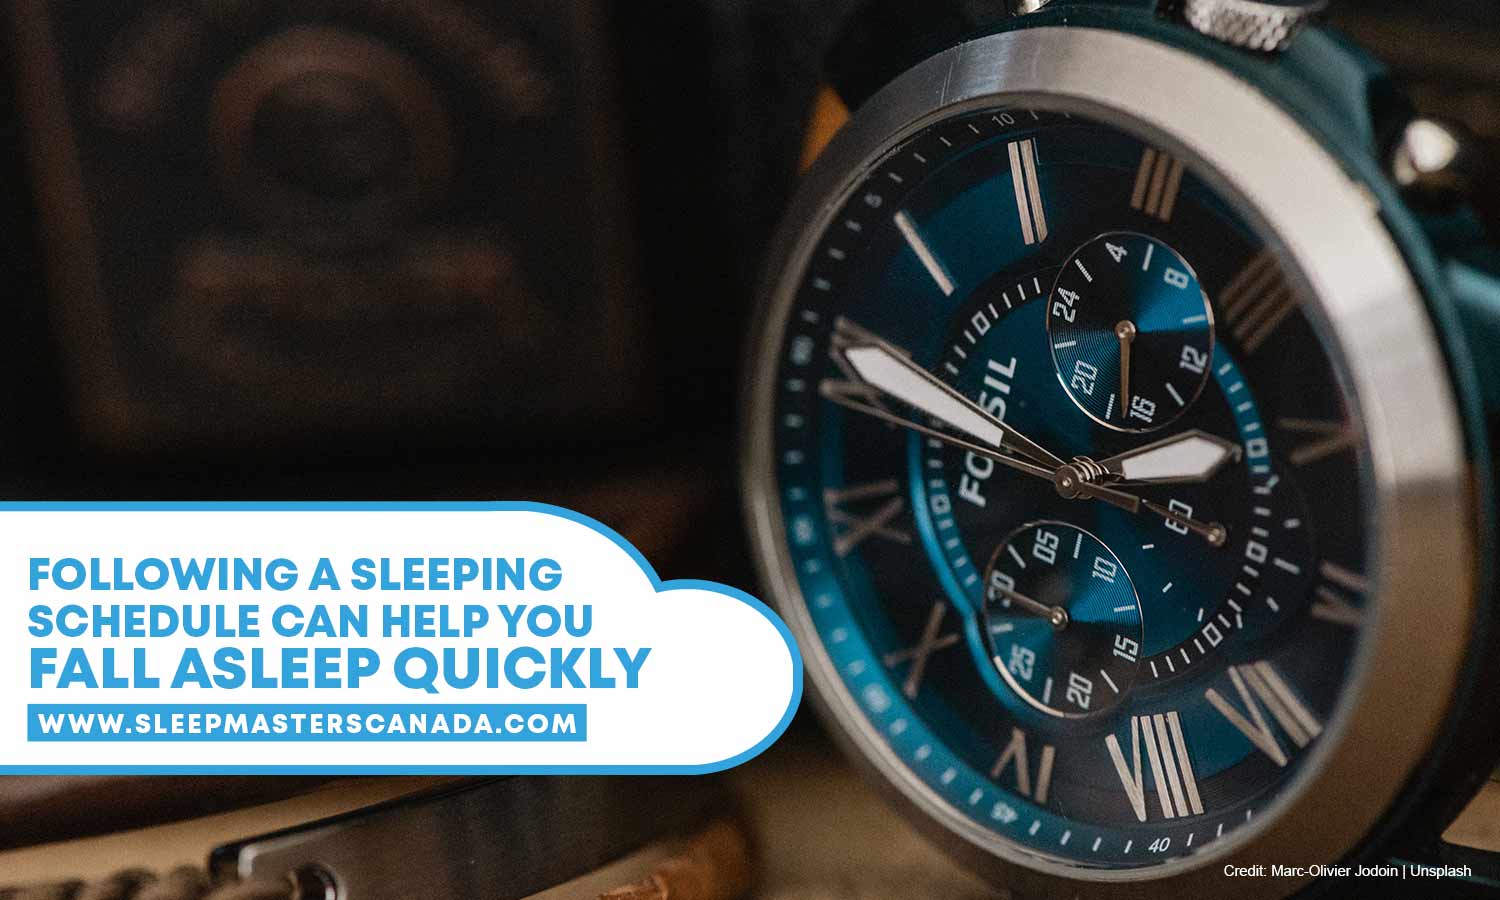 Following a sleeping schedule can help you fall asleep quickly